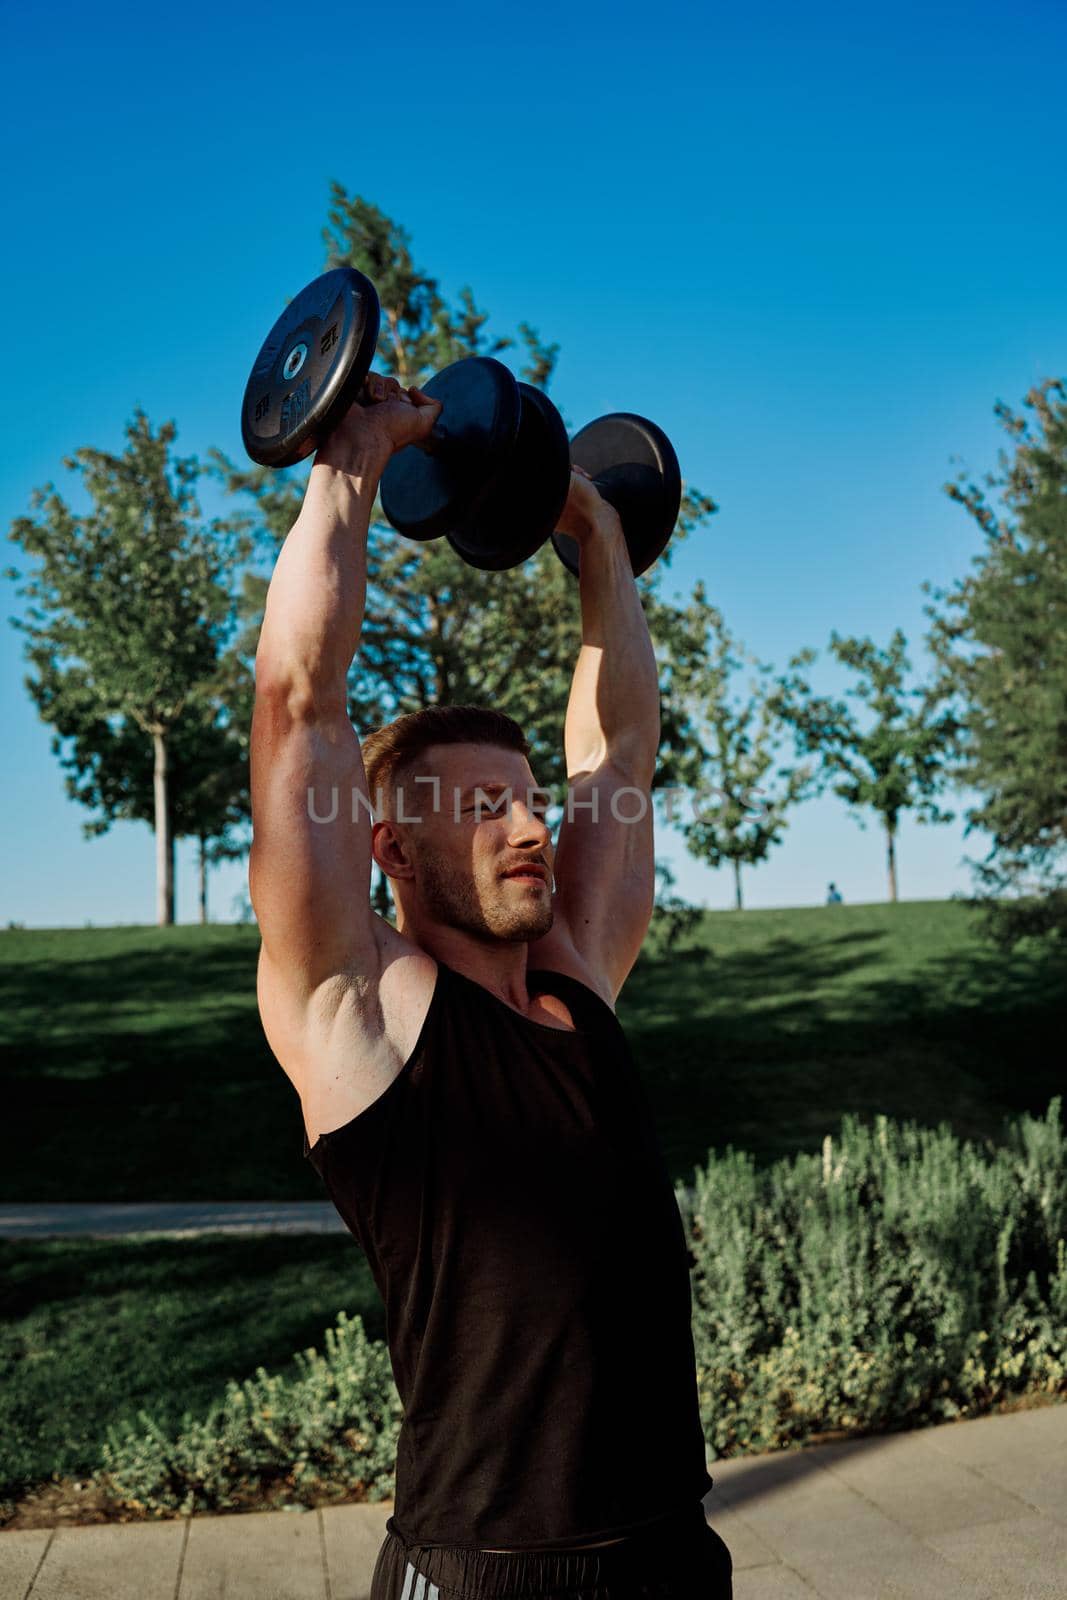 sporty man exercise fitness workout outdoors with dumbbells. High quality photo